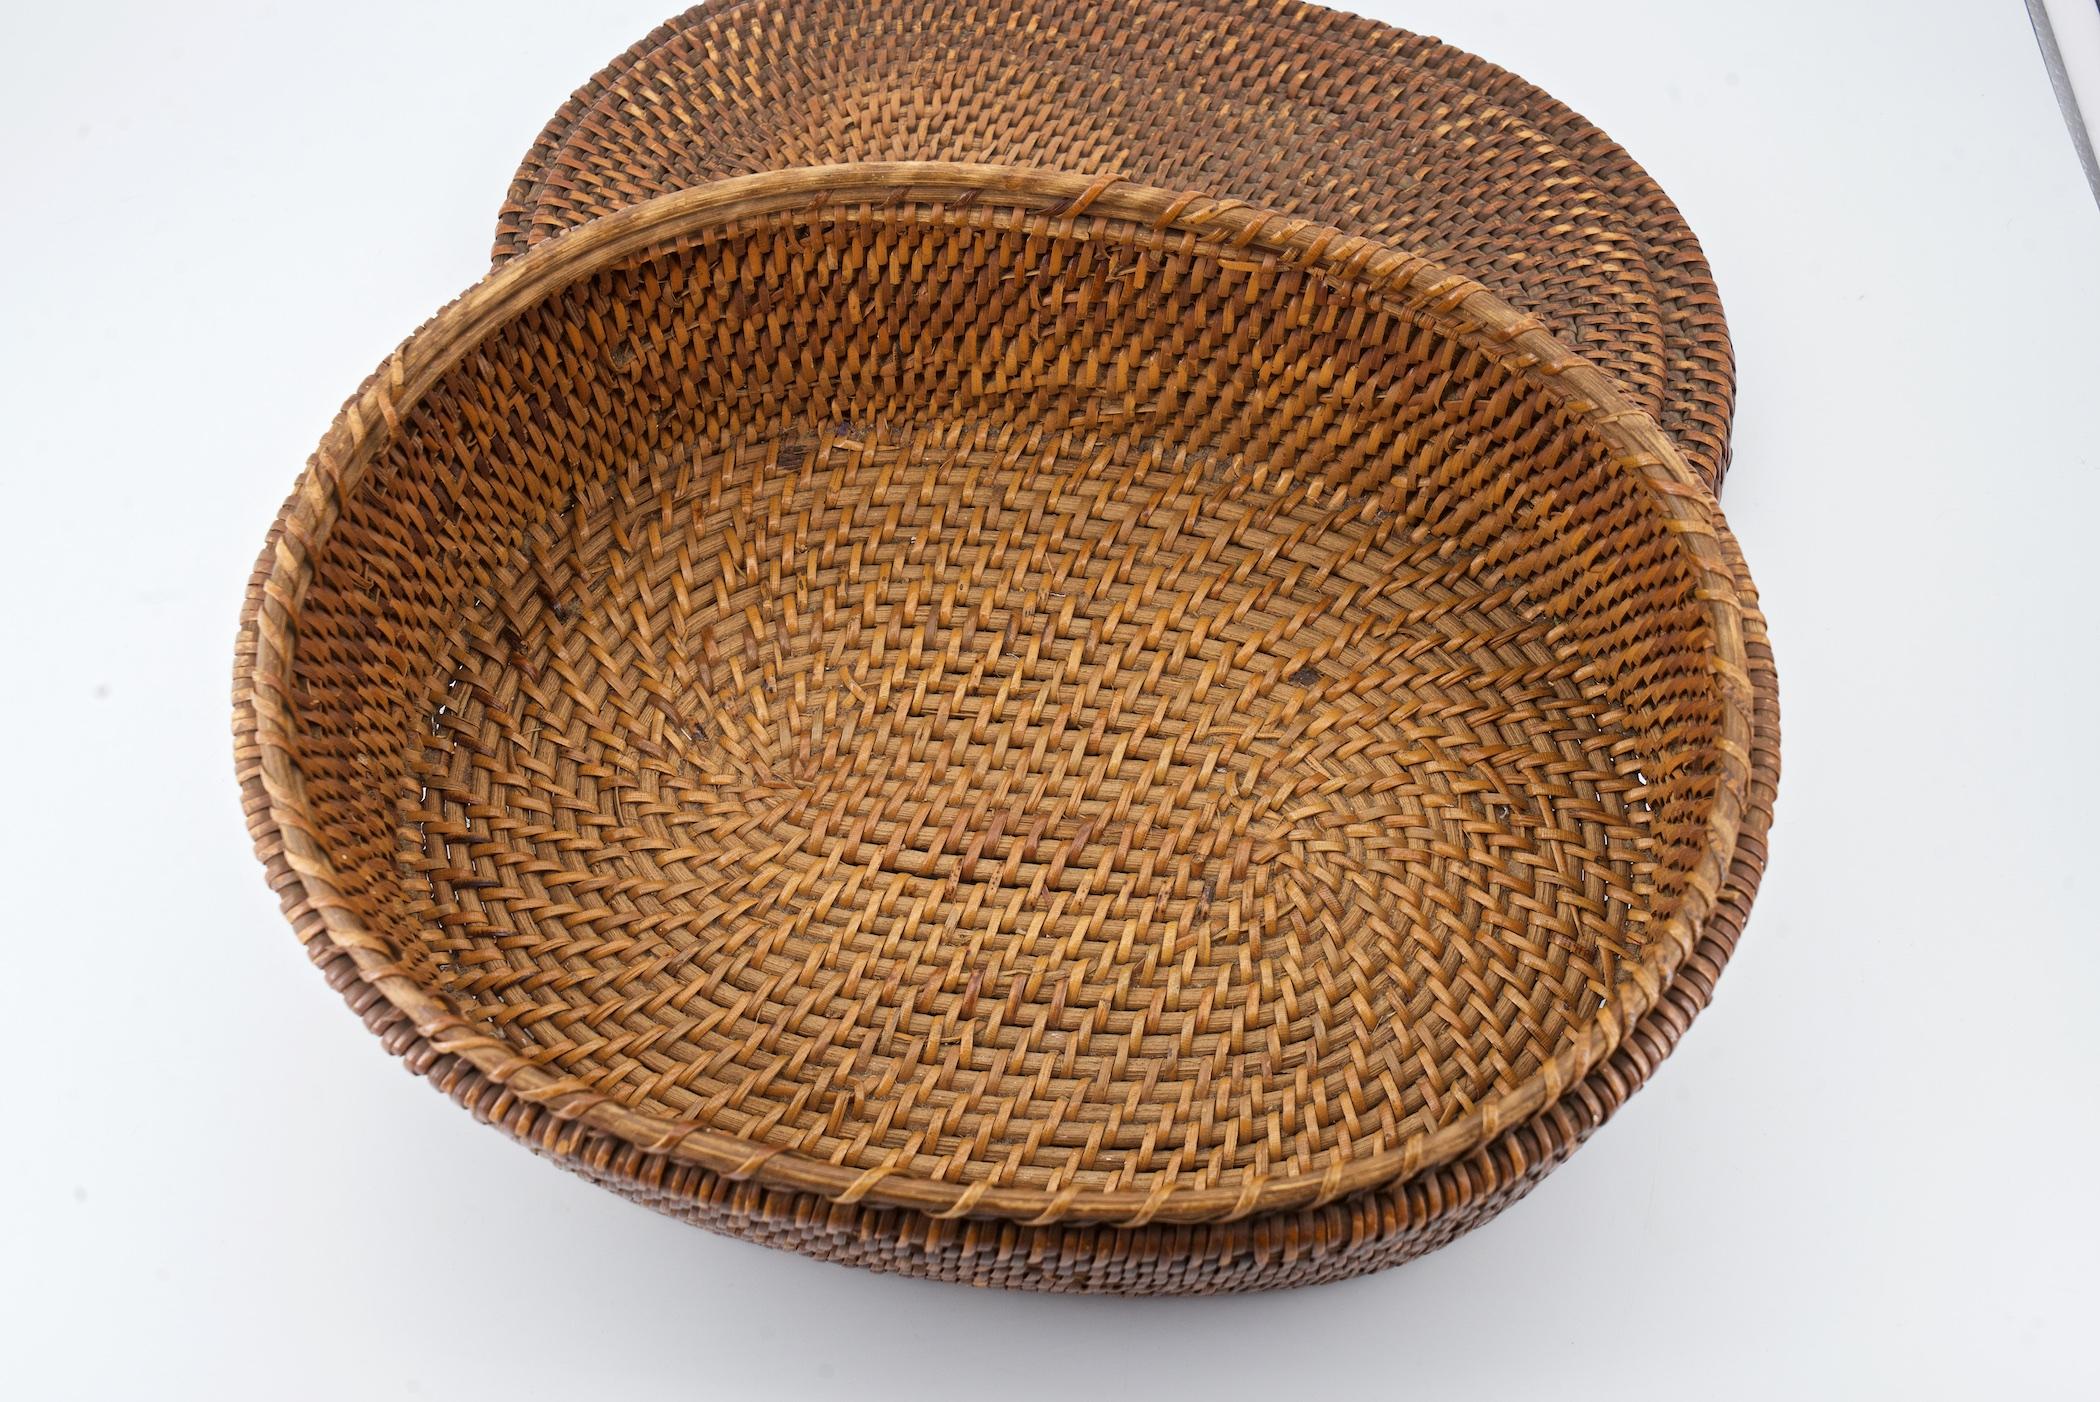 Native American Indian Woven Coiled Lidded Oval Basket 4